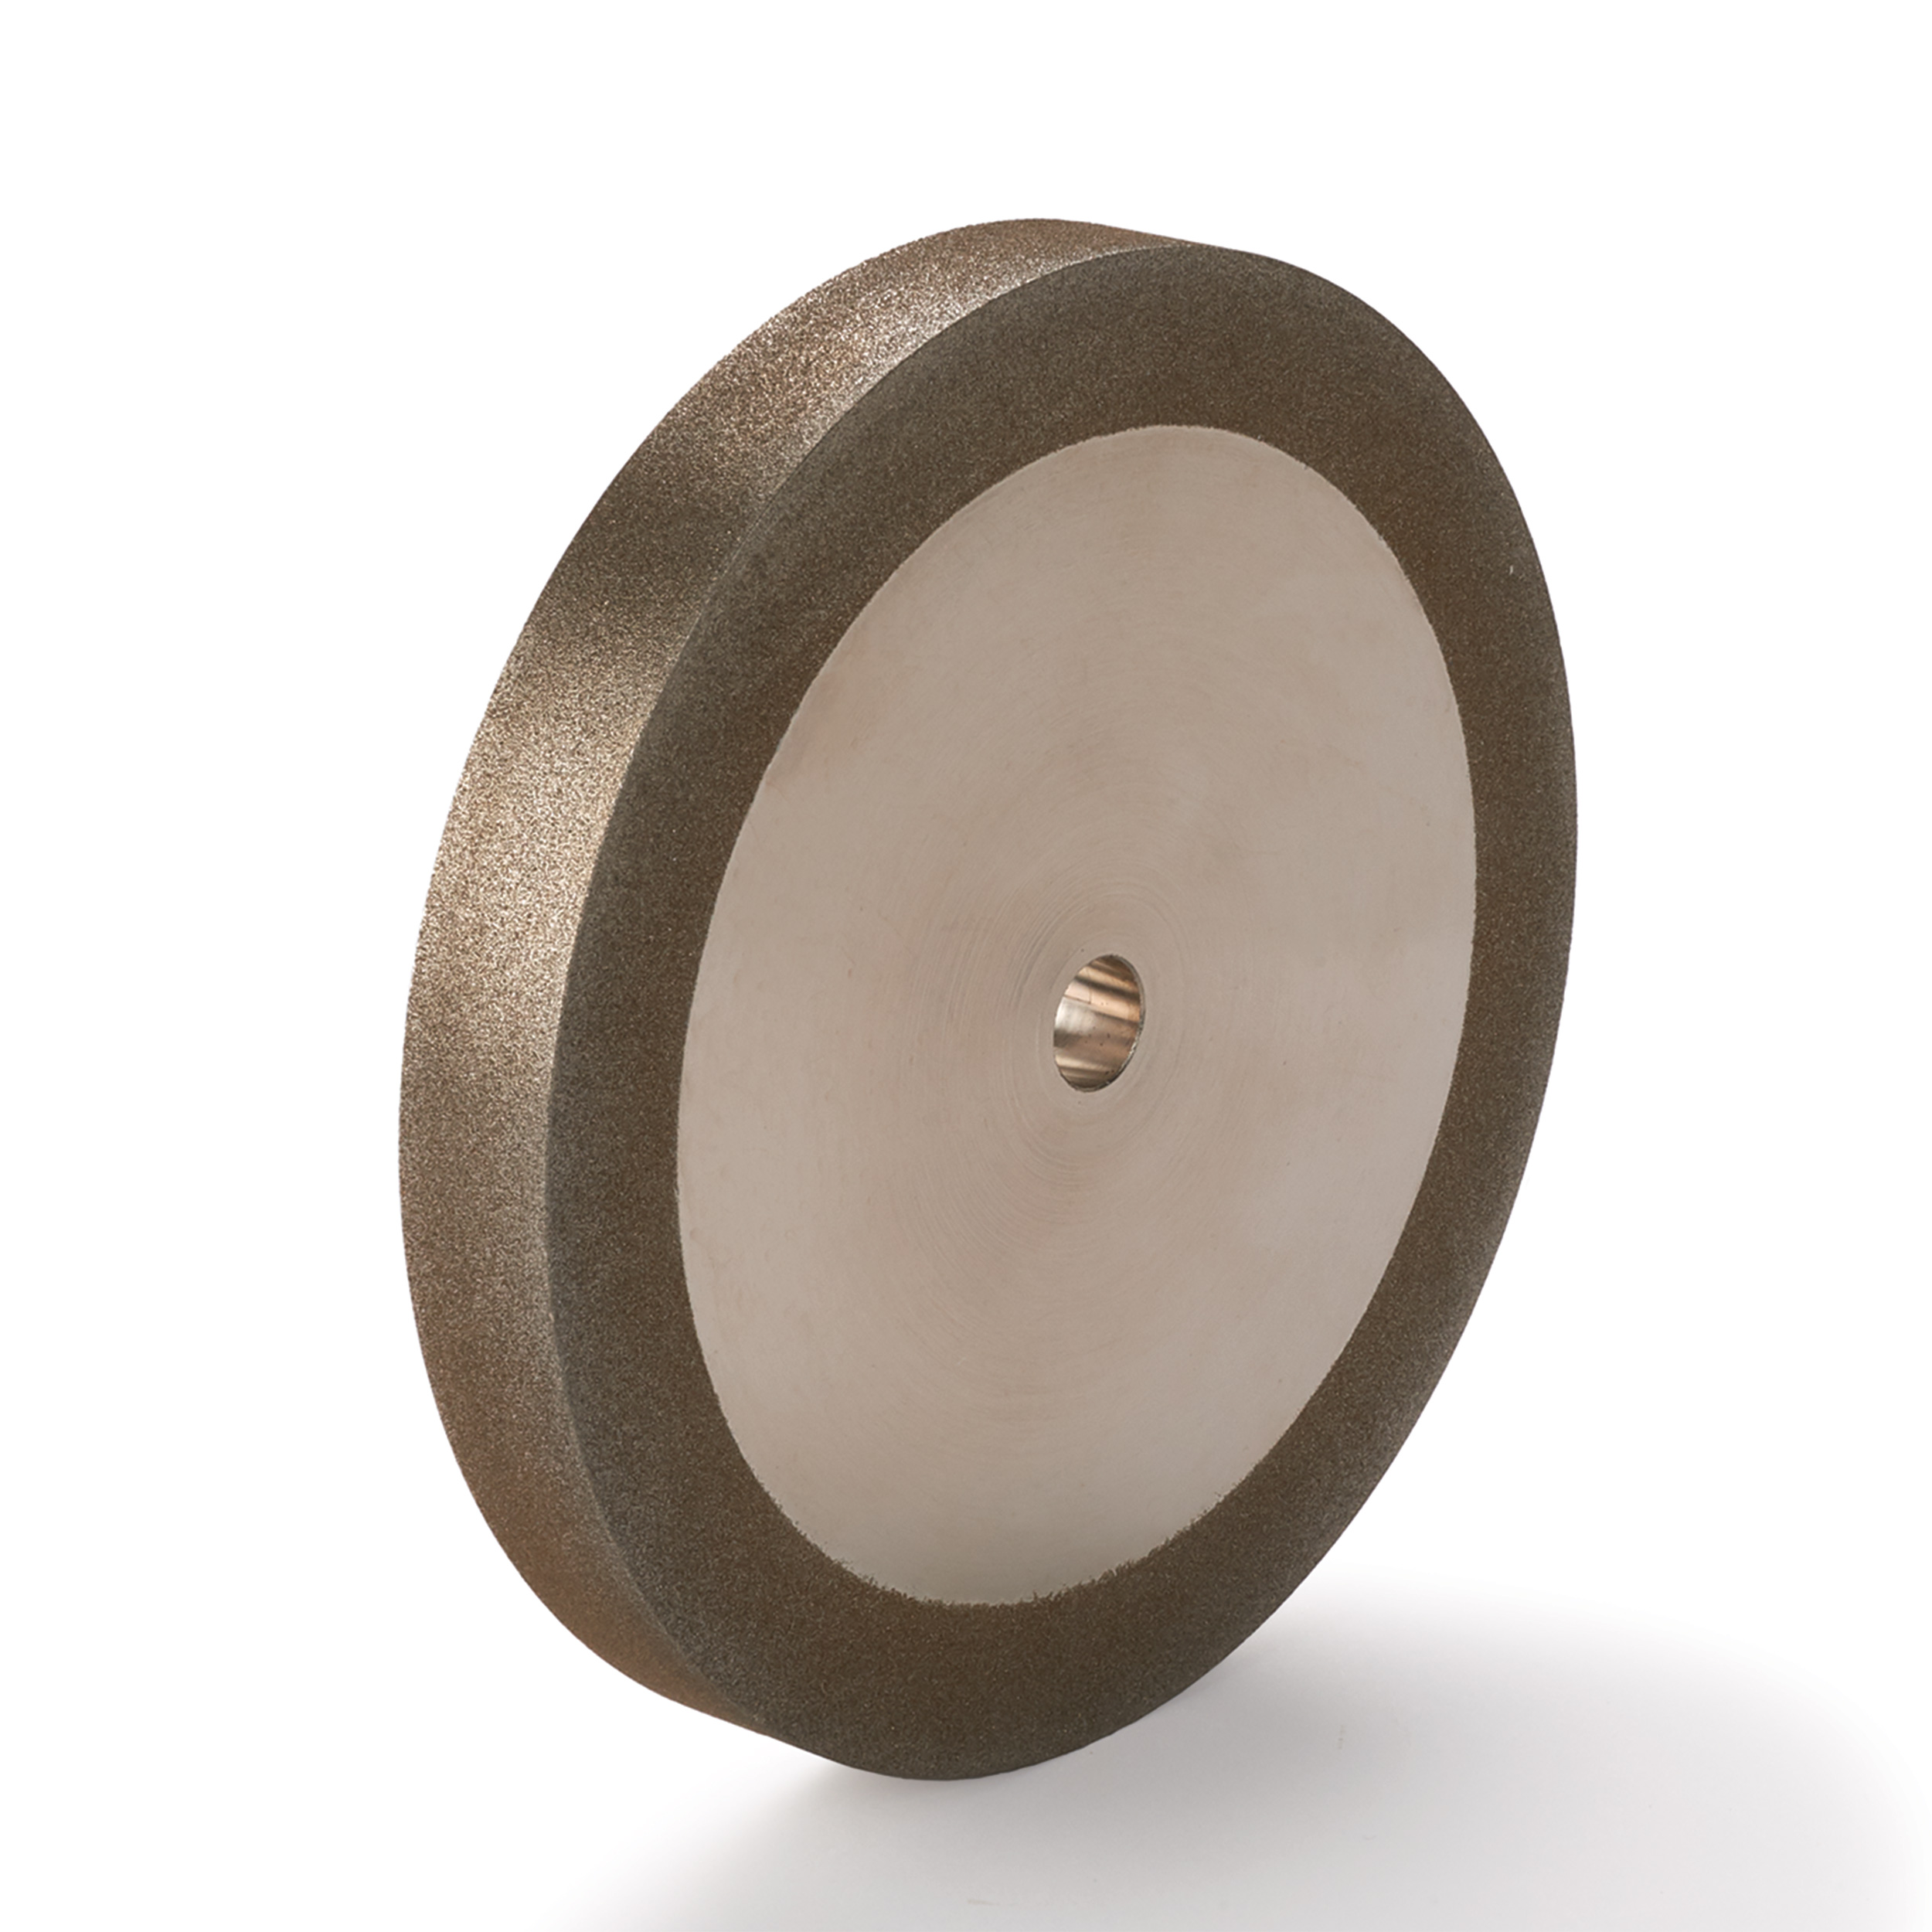 Woodriver 180-grit Cbn Grinding Wheel, 6"x 3/4" For Grinders With A 1/2" Arbor